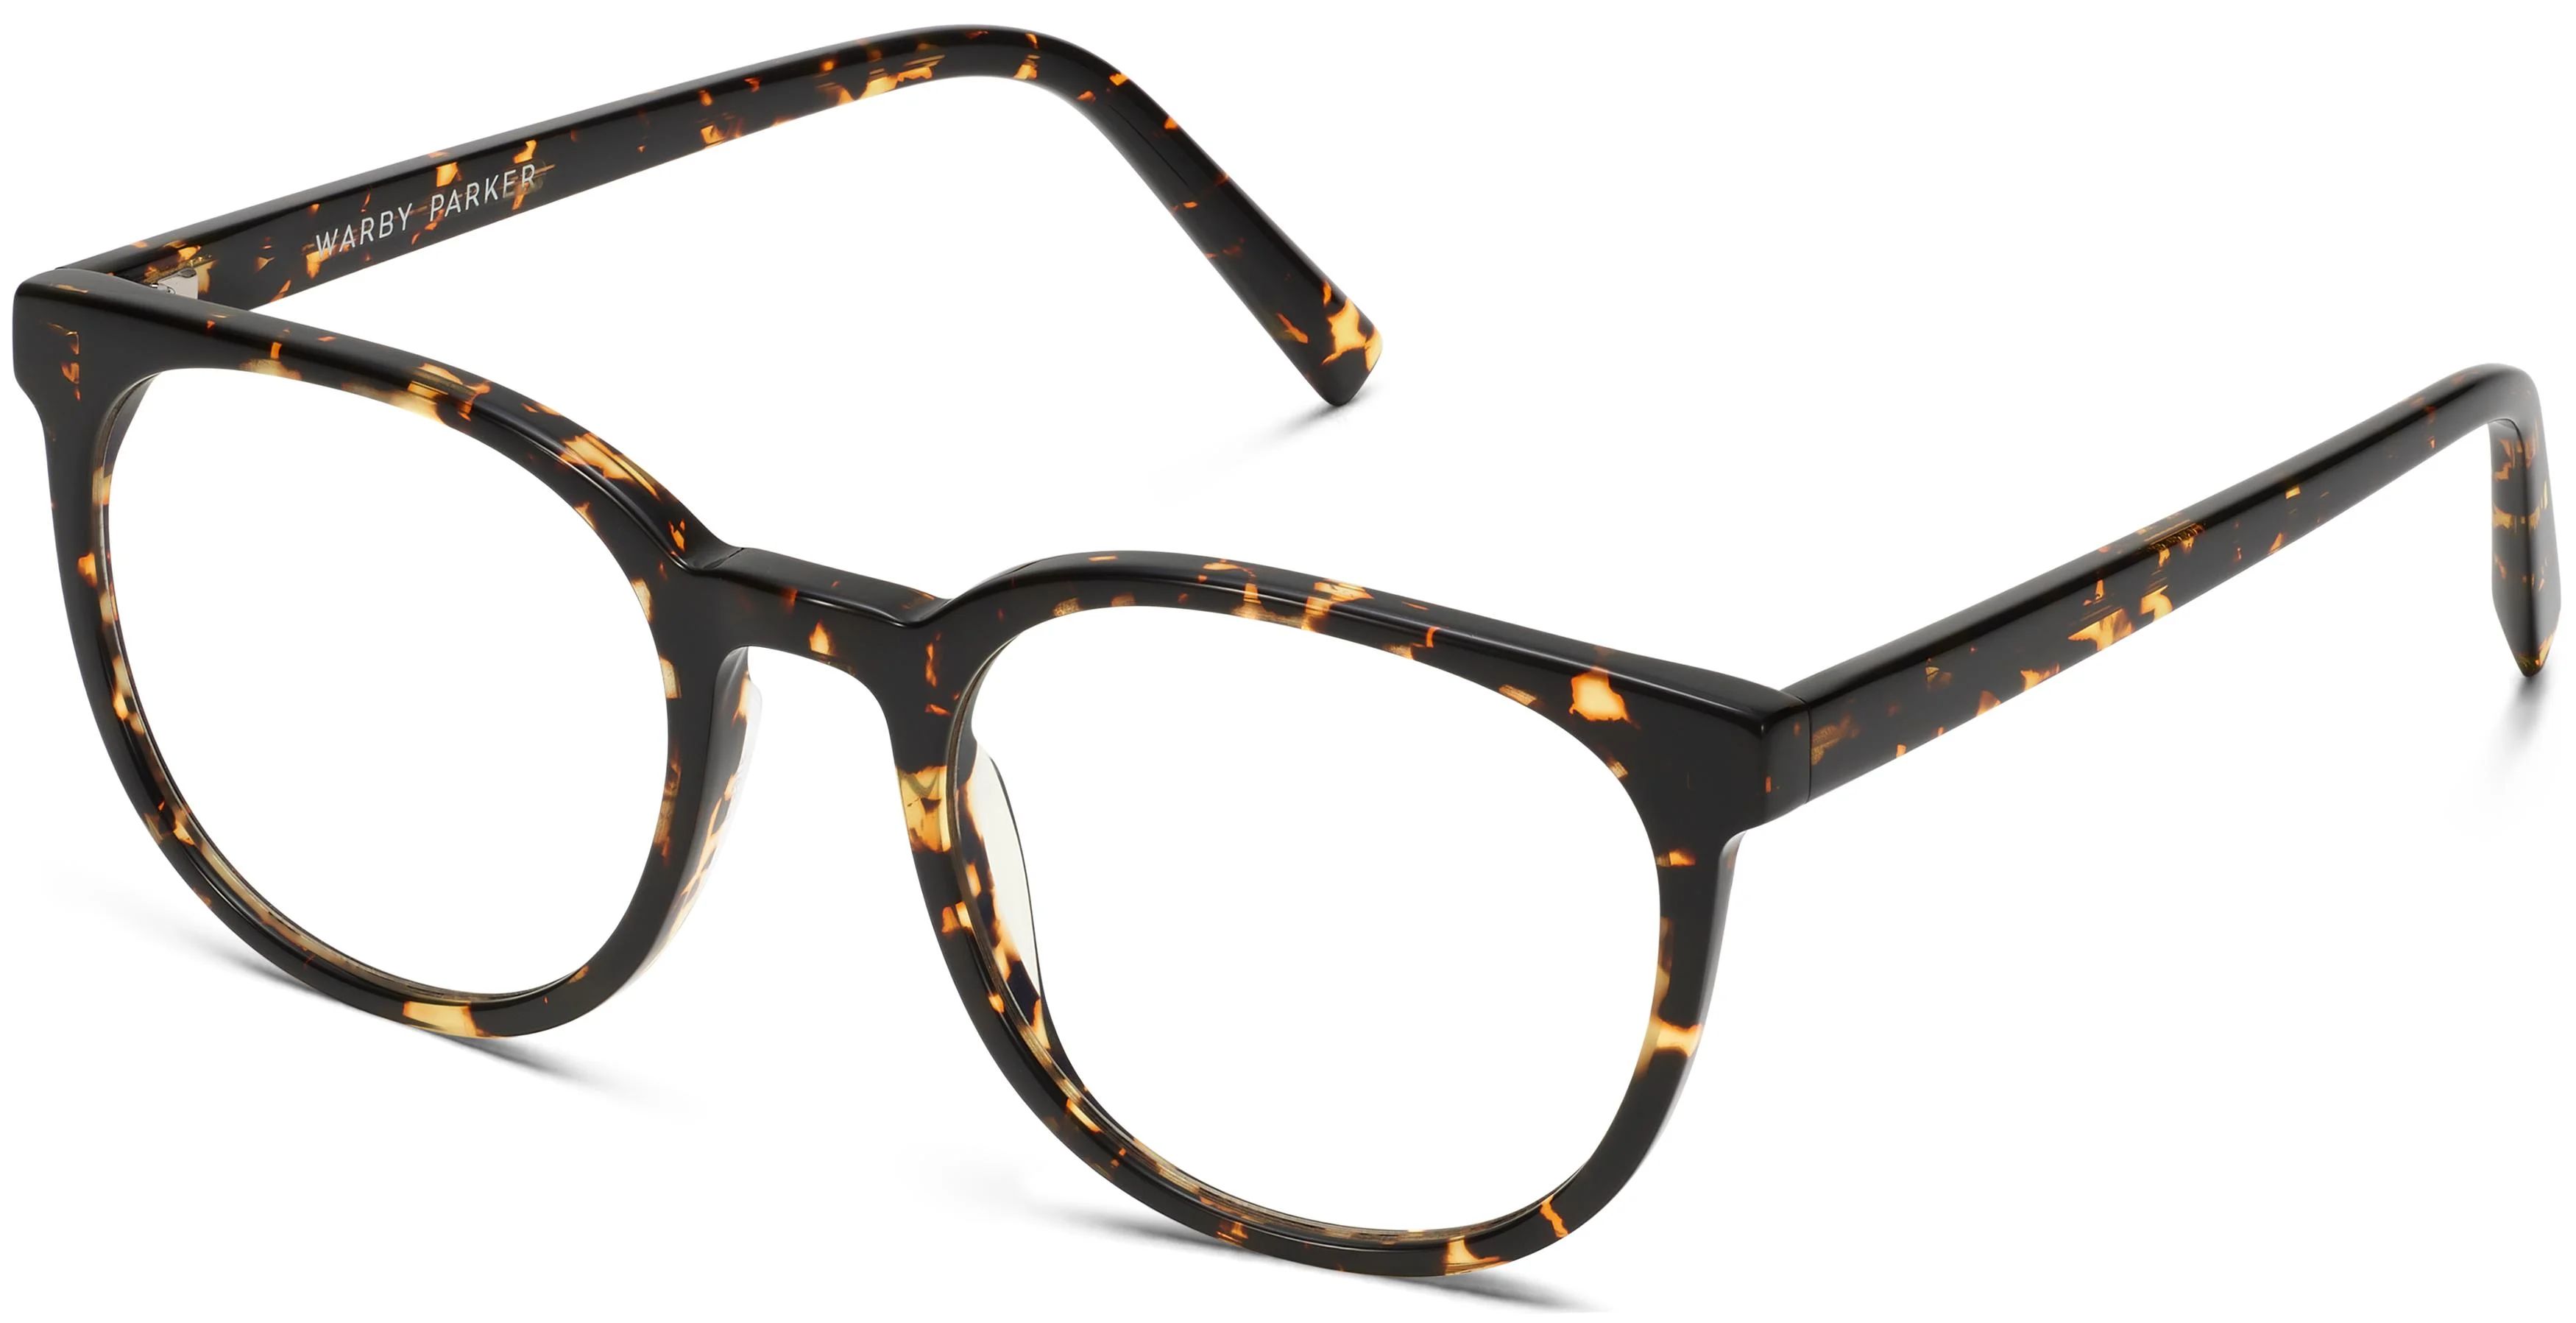 Rustin Eyeglasses in Root Beer with Brushed Ink | Warby Parker | Warby Parker (US)